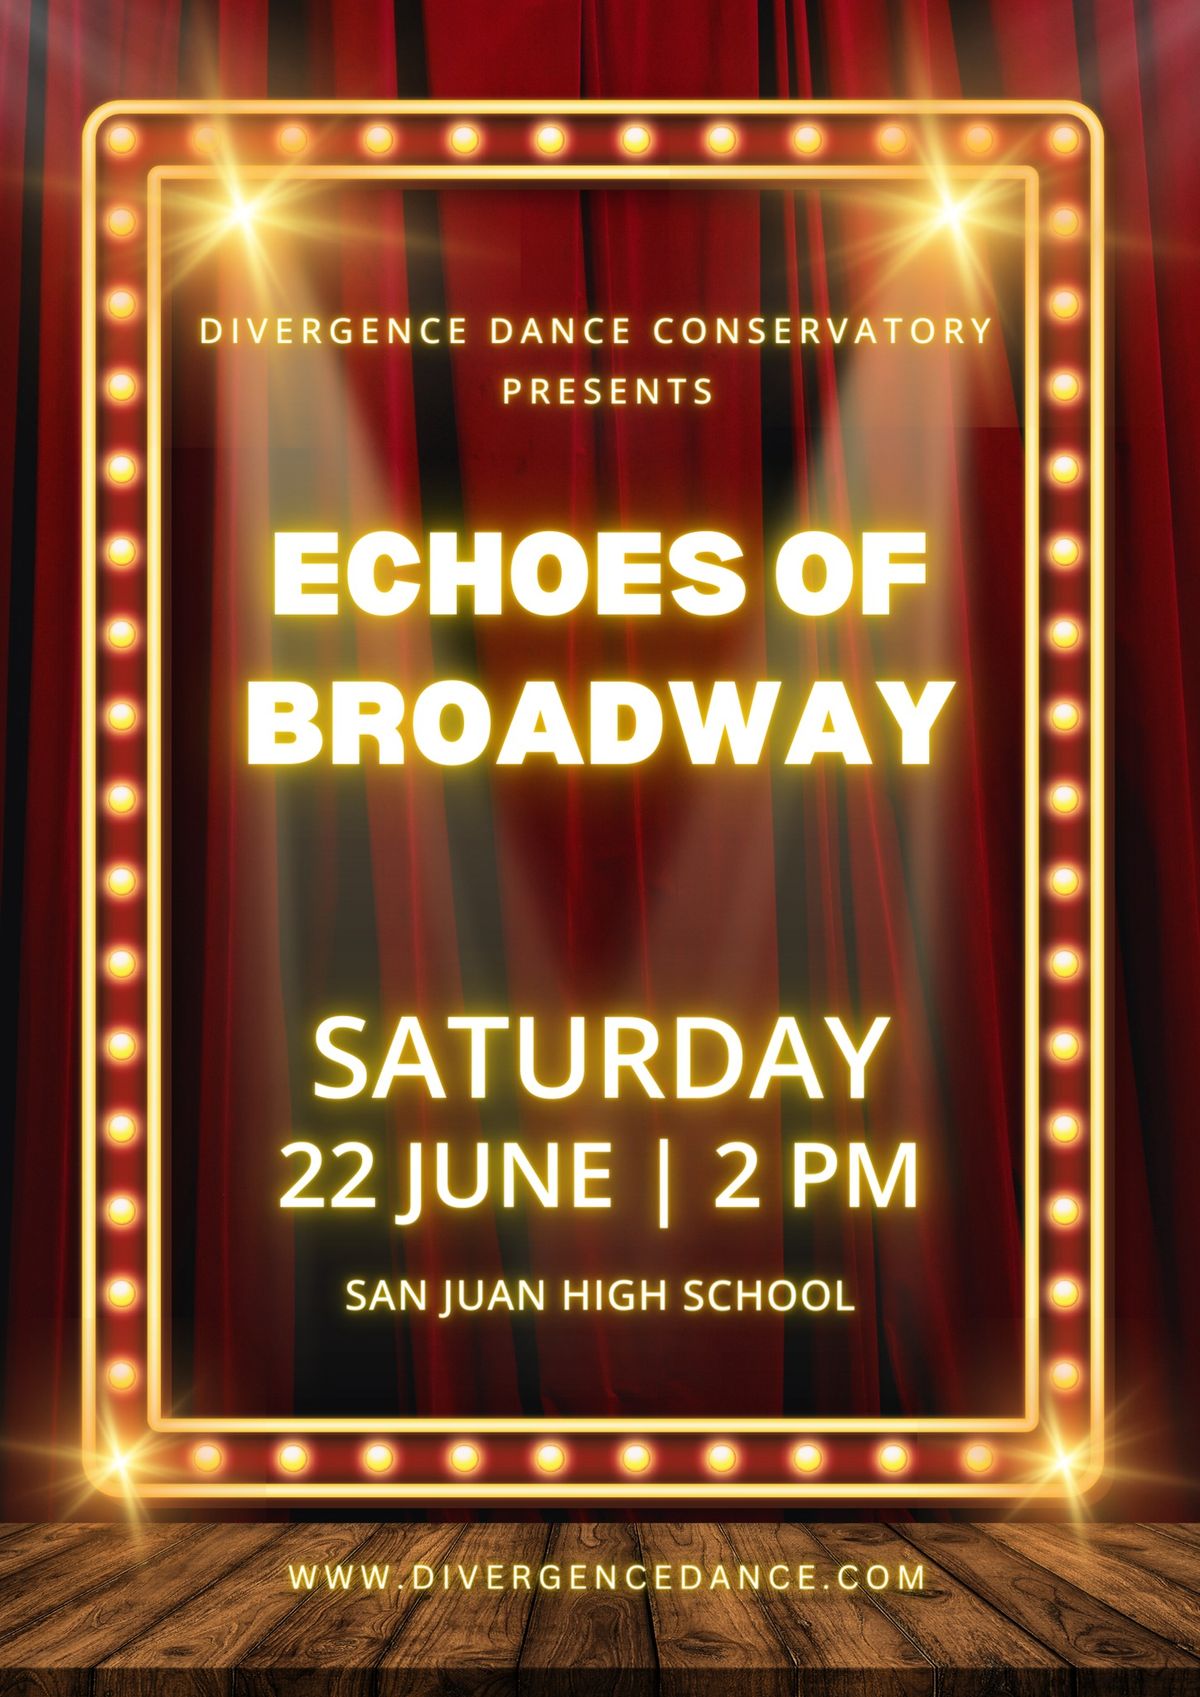 Divergence Dance Conservatory Presents: Echoes of Broadway